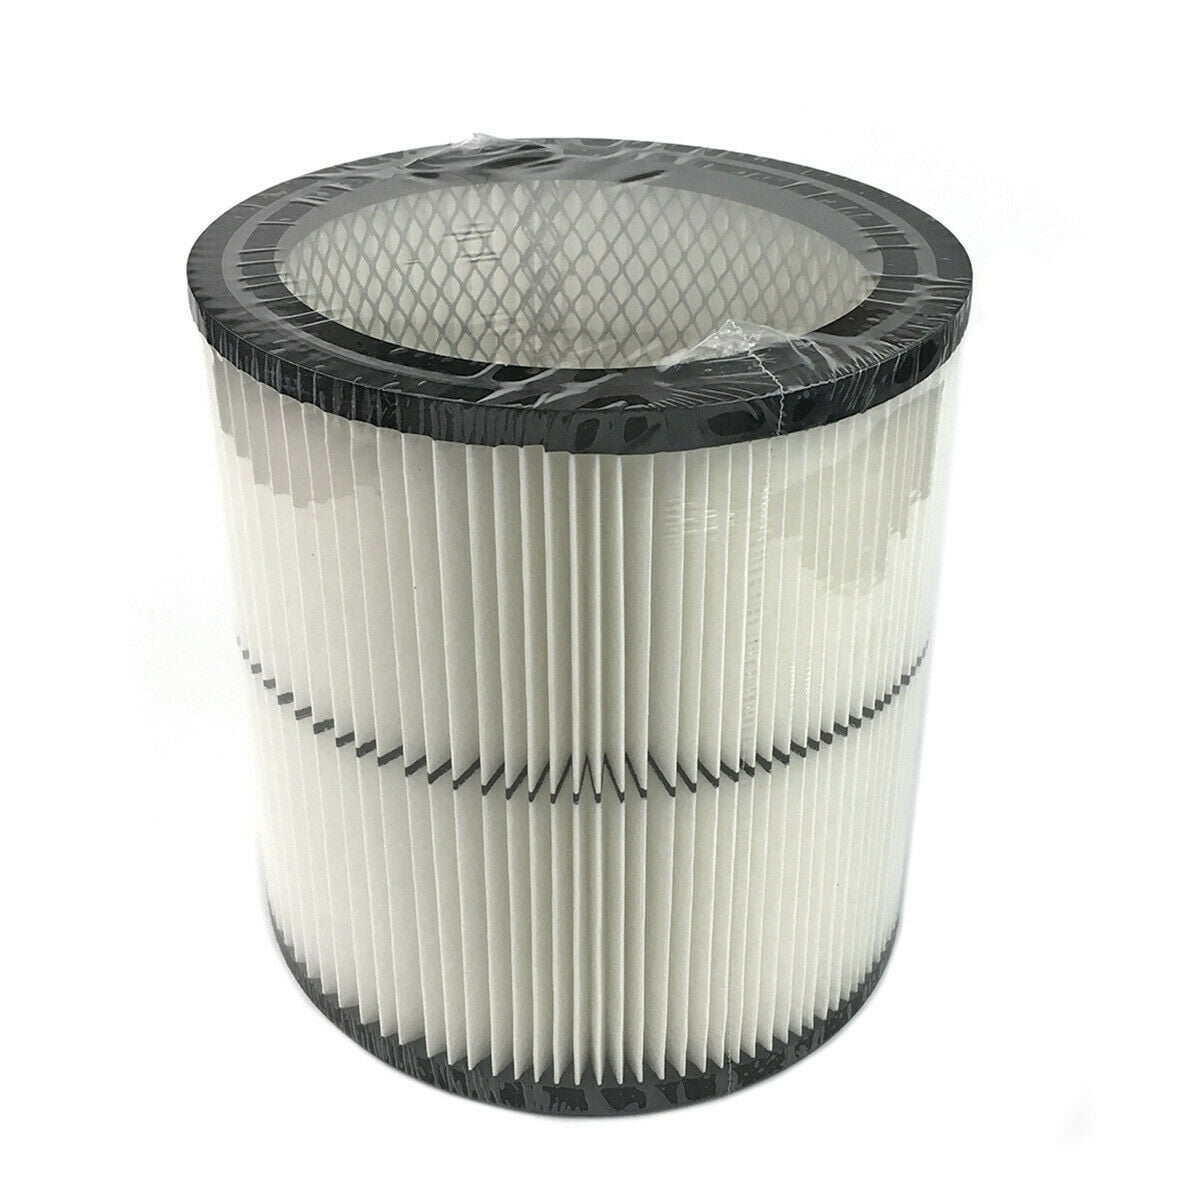 Fit for Craftsman 9-17884 Cartridge Shop Vac Filter 6 8 12 16 Gallon New A7 